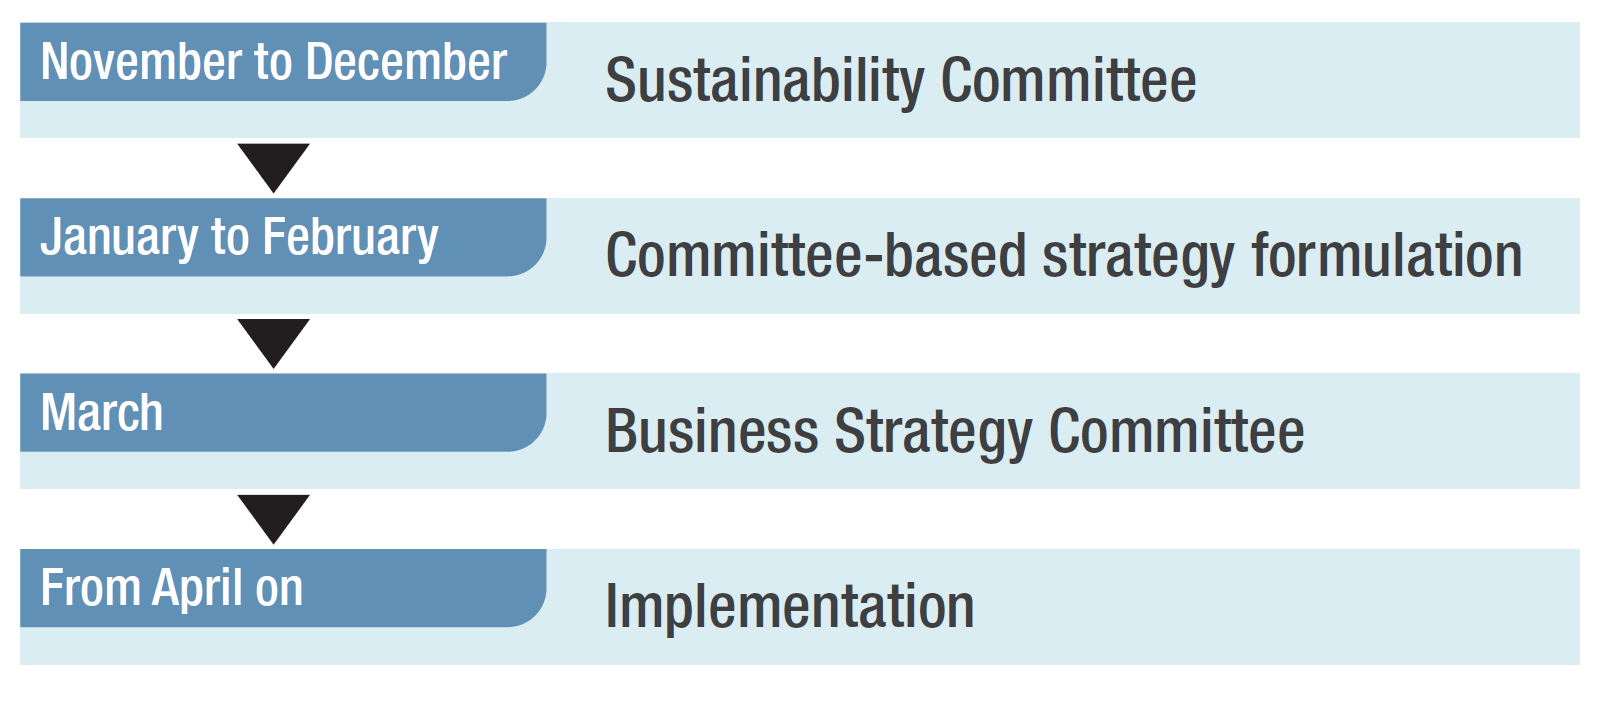 Cycle for Integrating Sustainability into Business Strategy